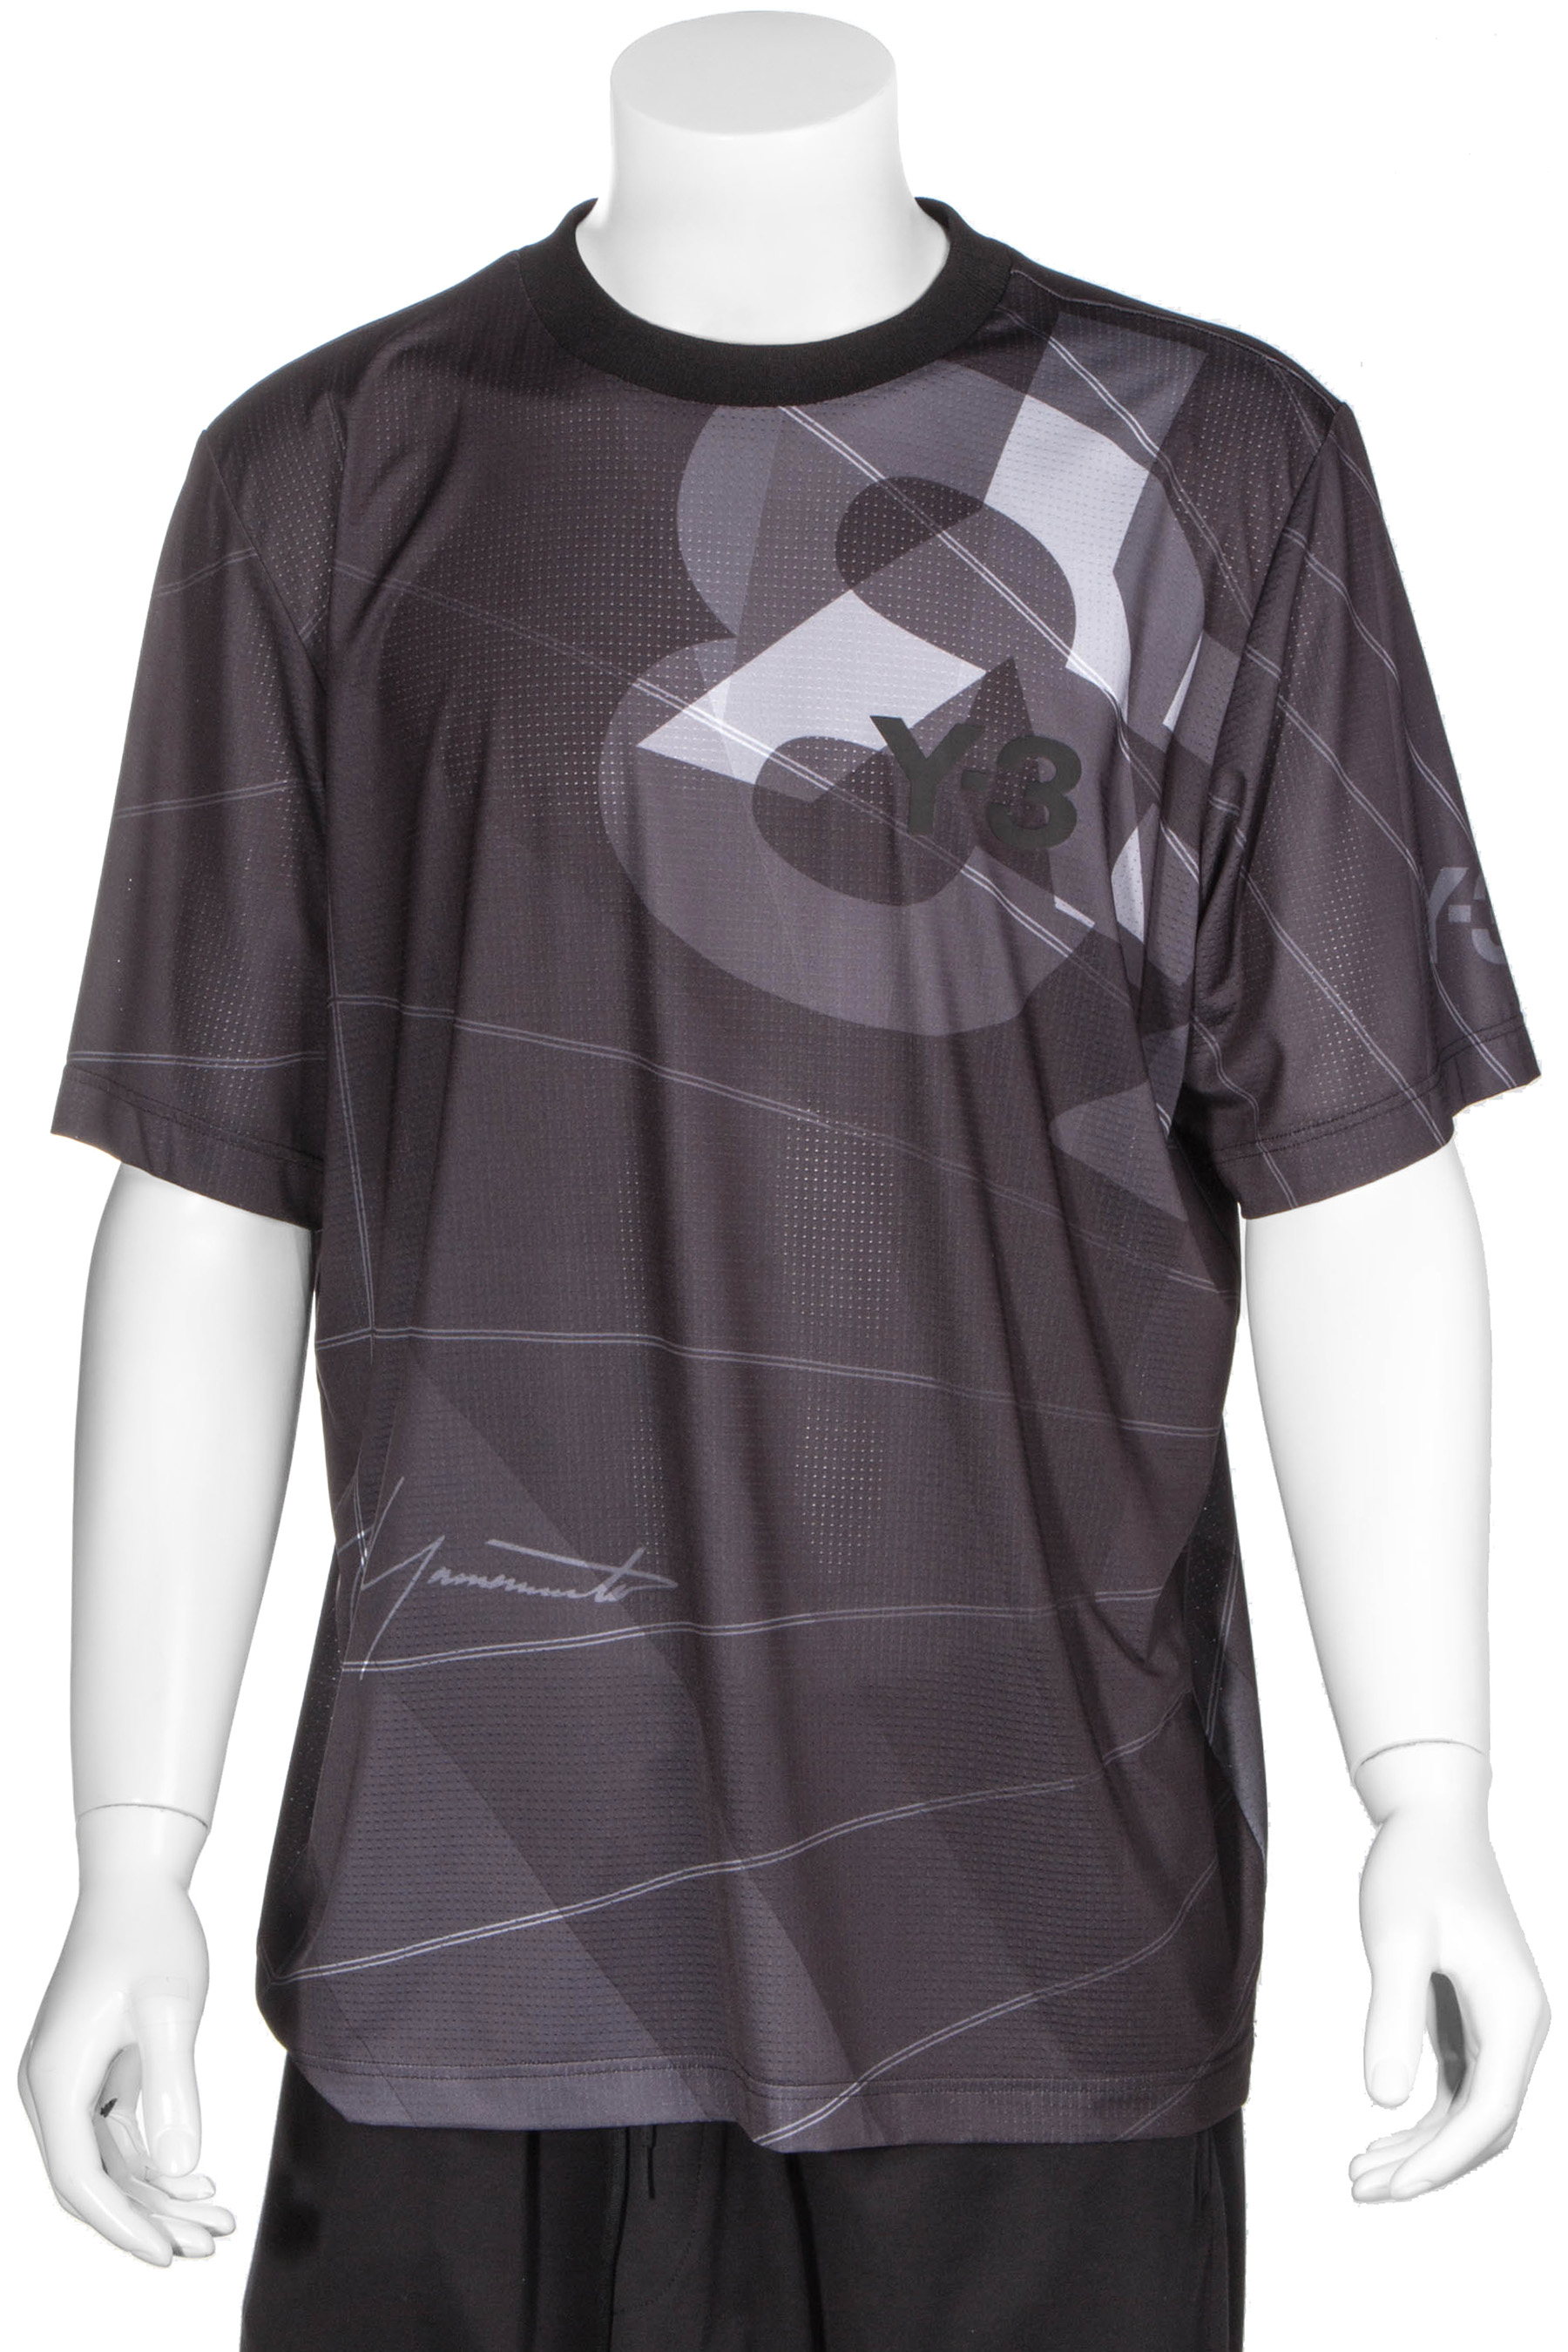 Y-3 AOP Football Shirt | T-Shirts | Clothing | Men | mientus Online Store